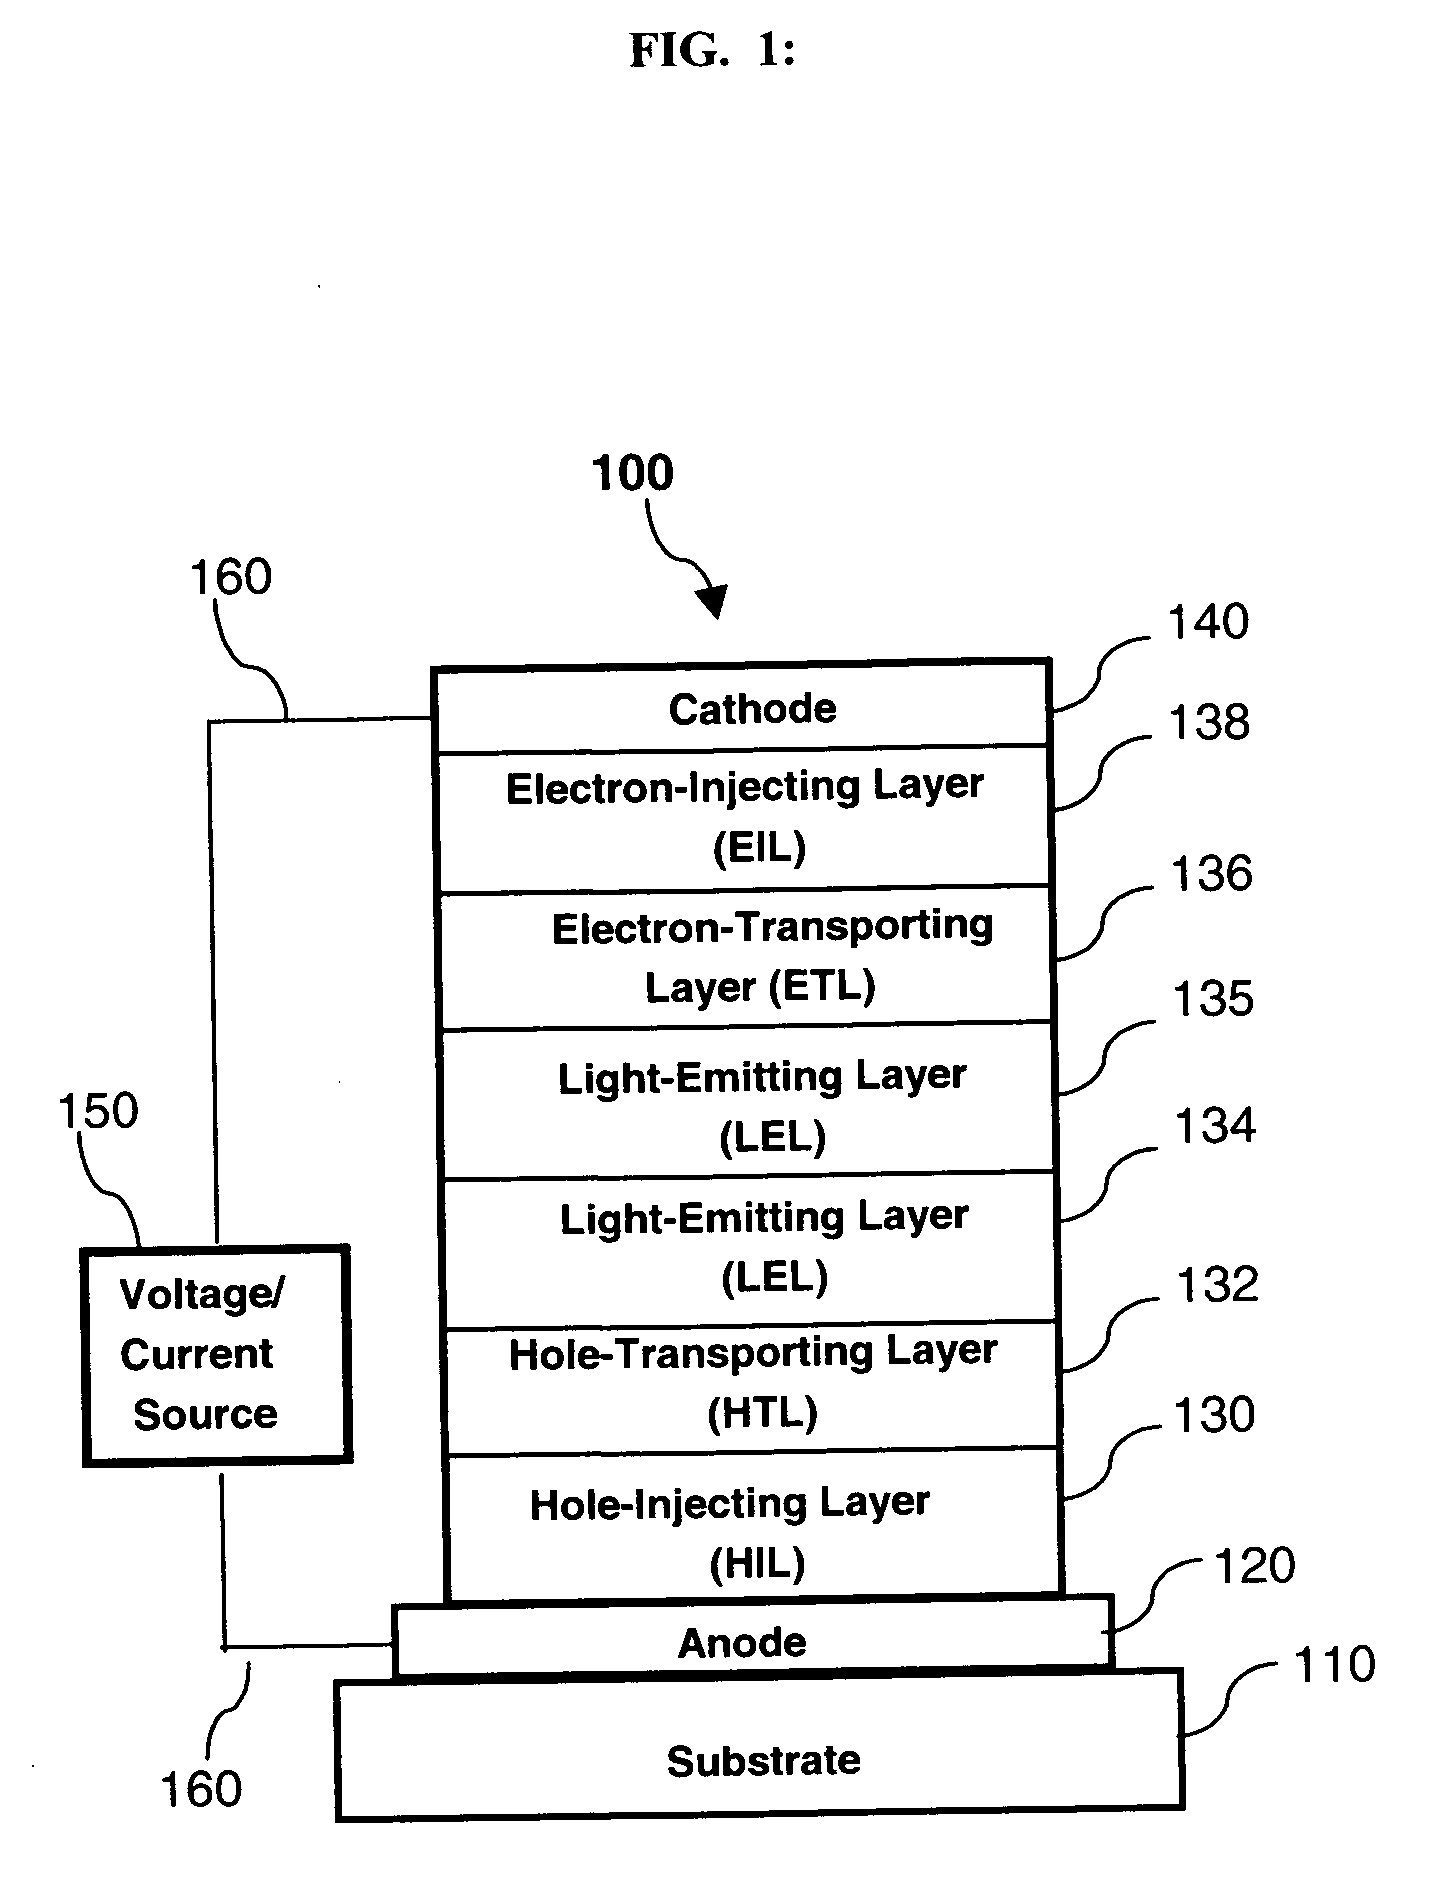 Electron-transporting layer for white OLED device